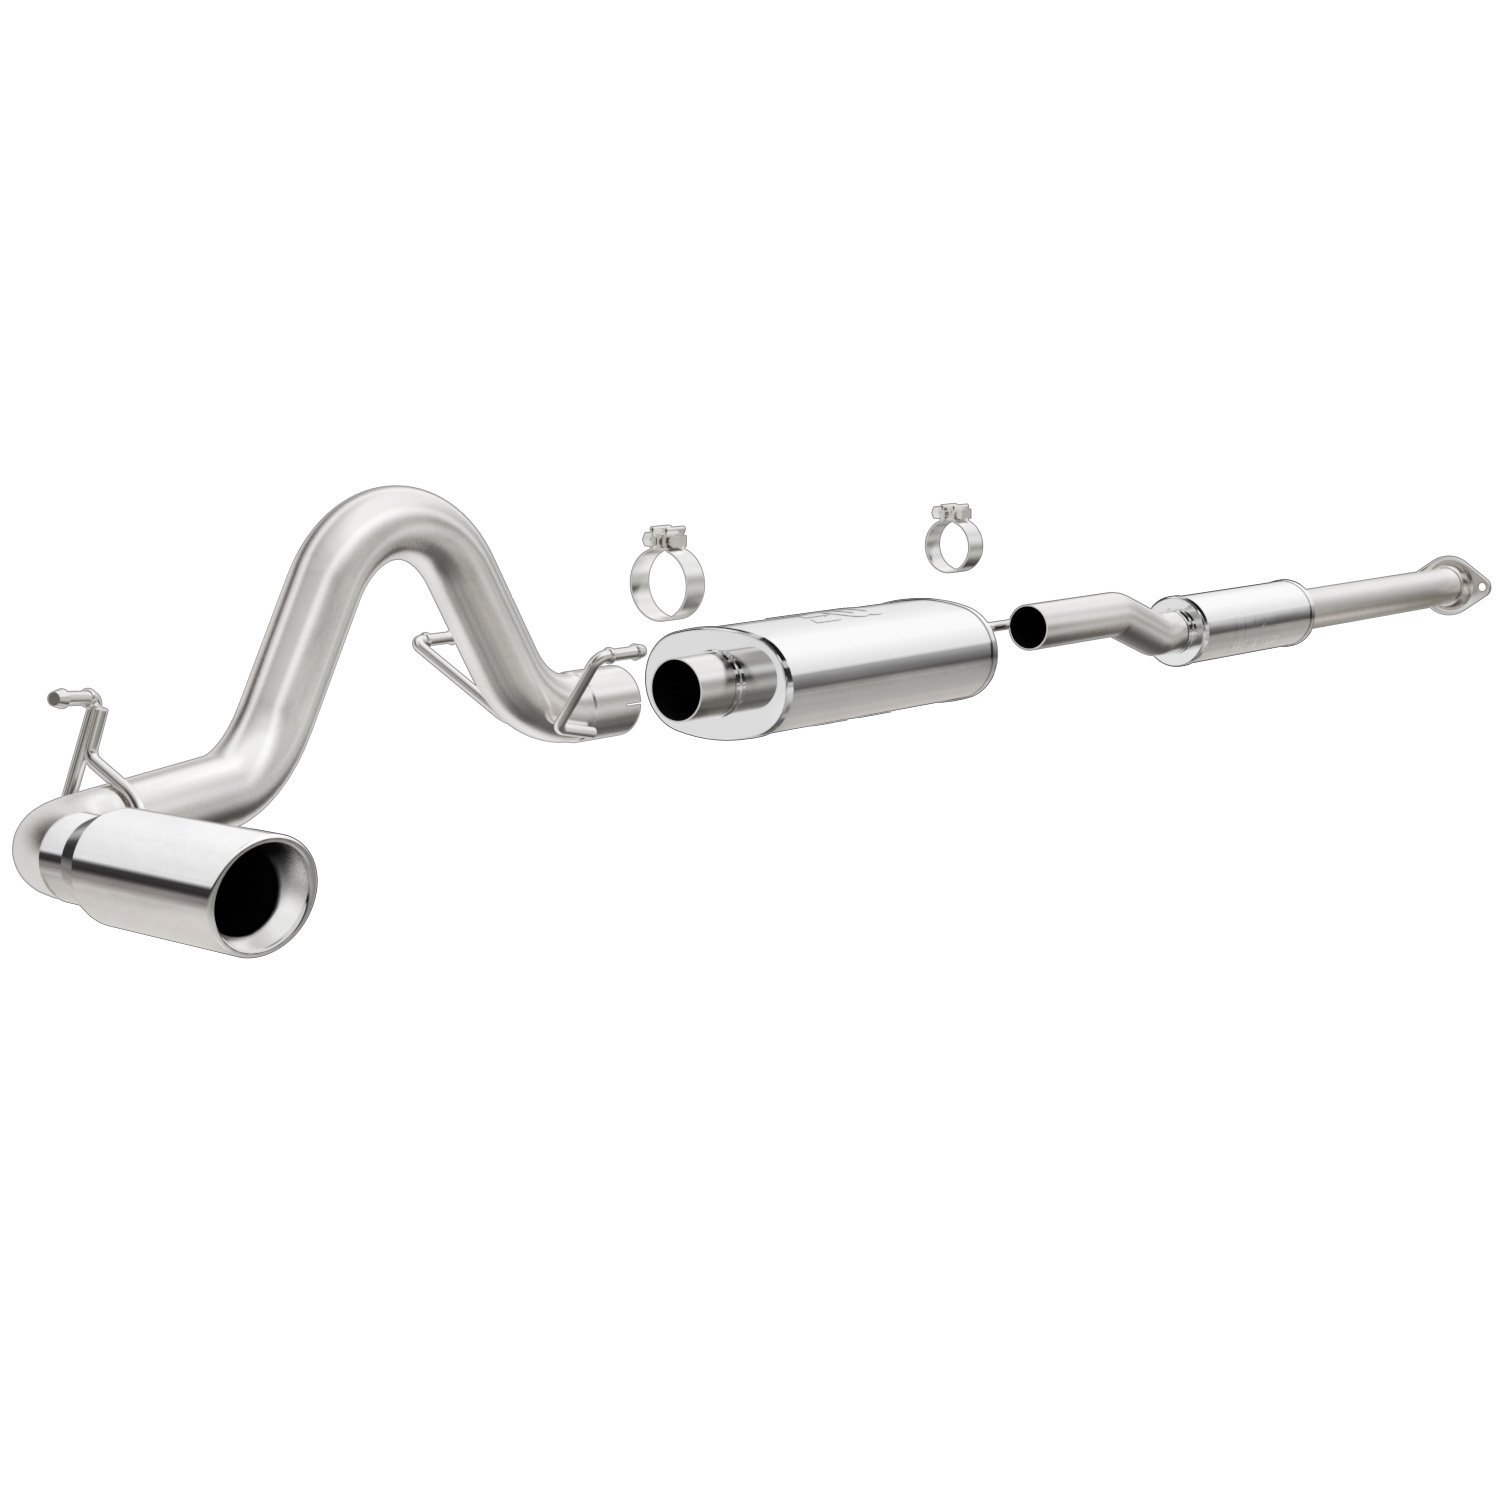 MF Series Cat-Back Exhaust System 2013-15 Tacoma 4.0L V6 (Crew Cab, 73.5" Bed)